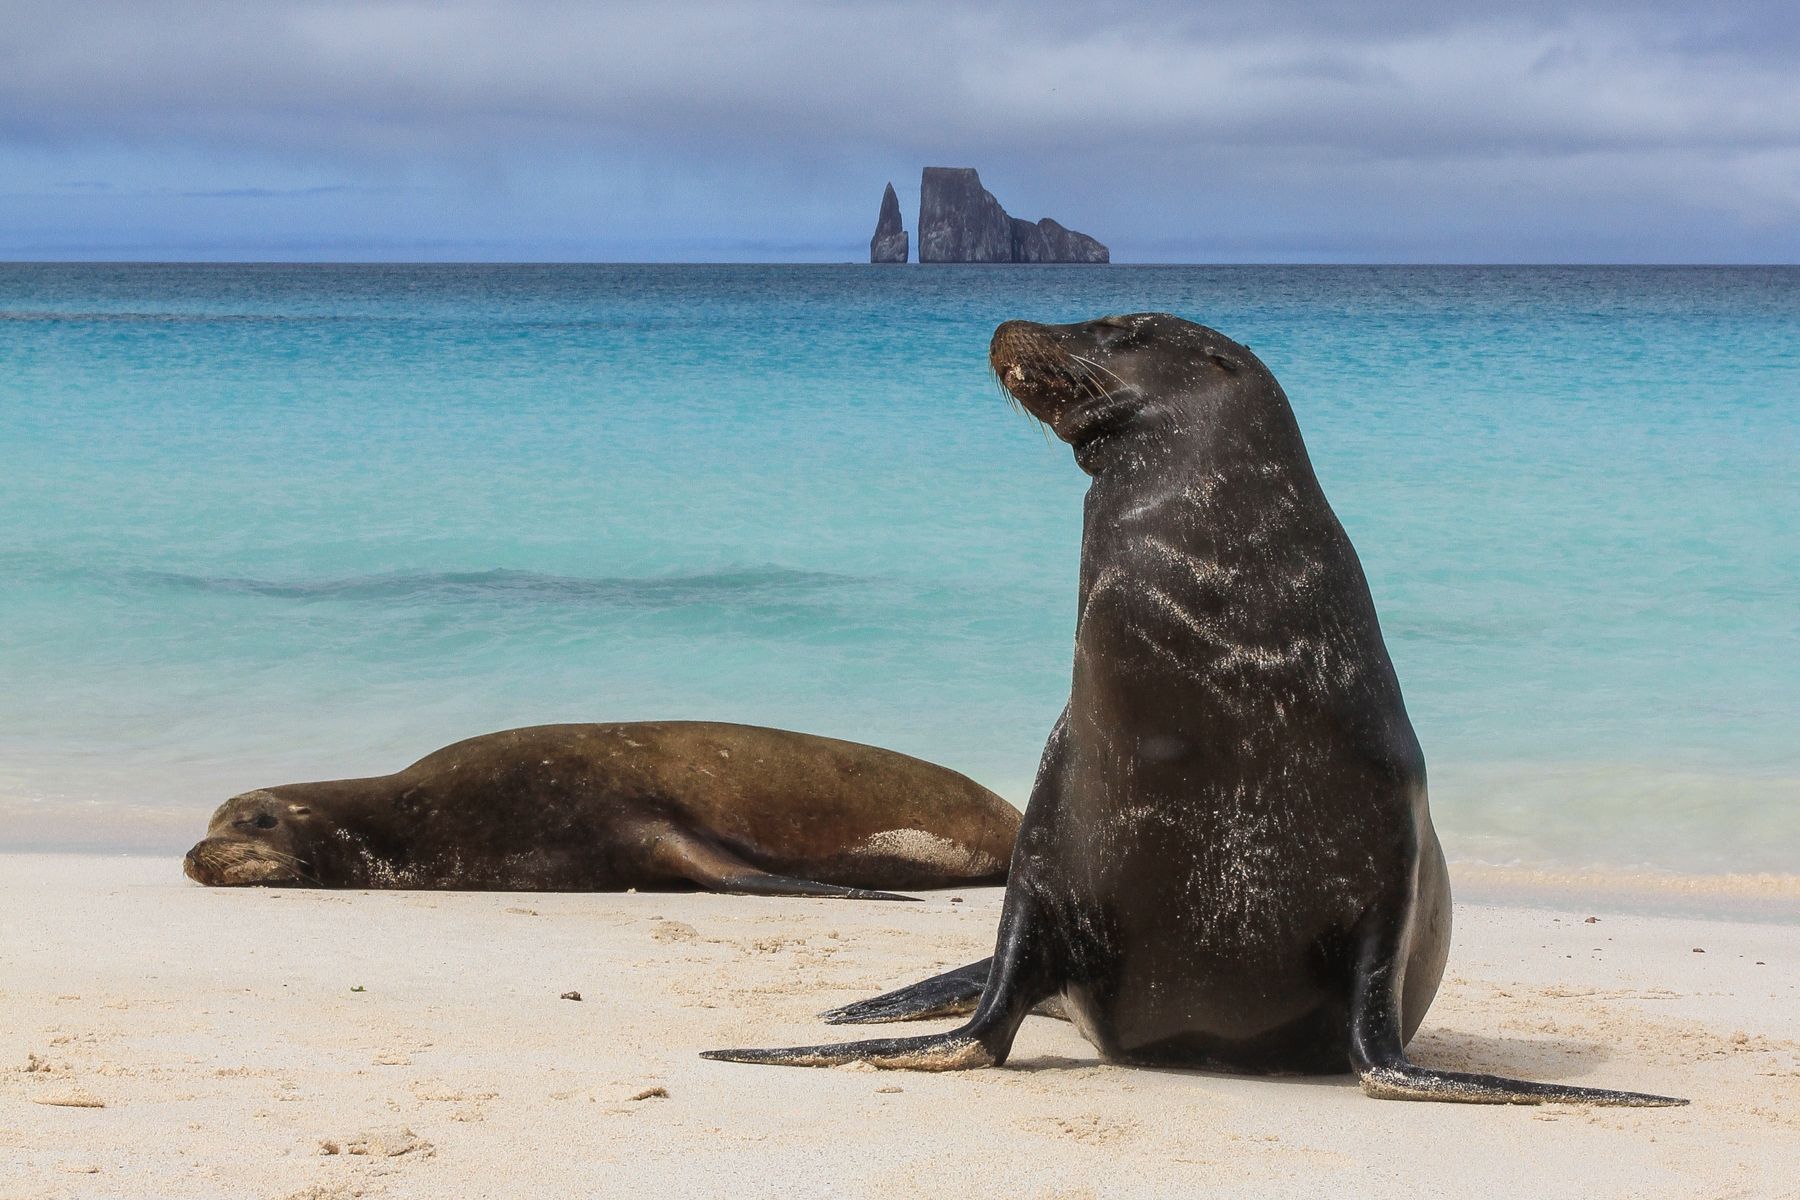 Galapagos Sealions are numerous, inhabiting just about every beach and many rocky areas